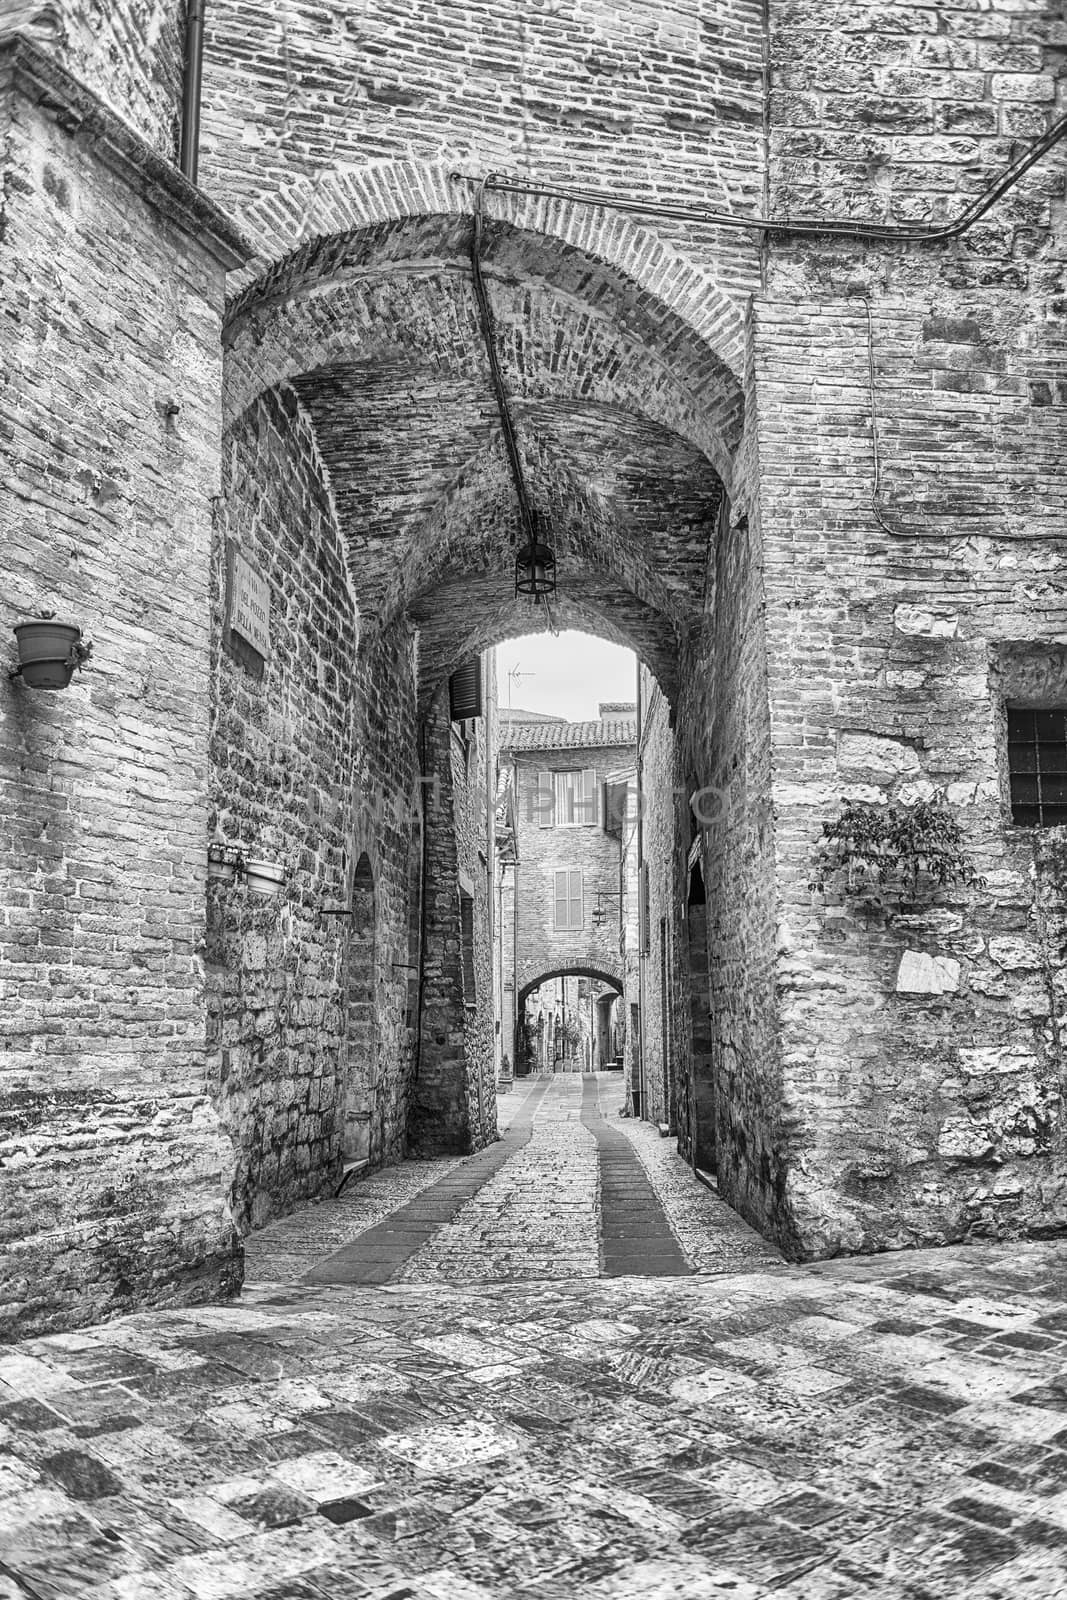 Walking in the picturesque and ancient streets of Assisi, one of the most beautiful medieval towns in central Italy